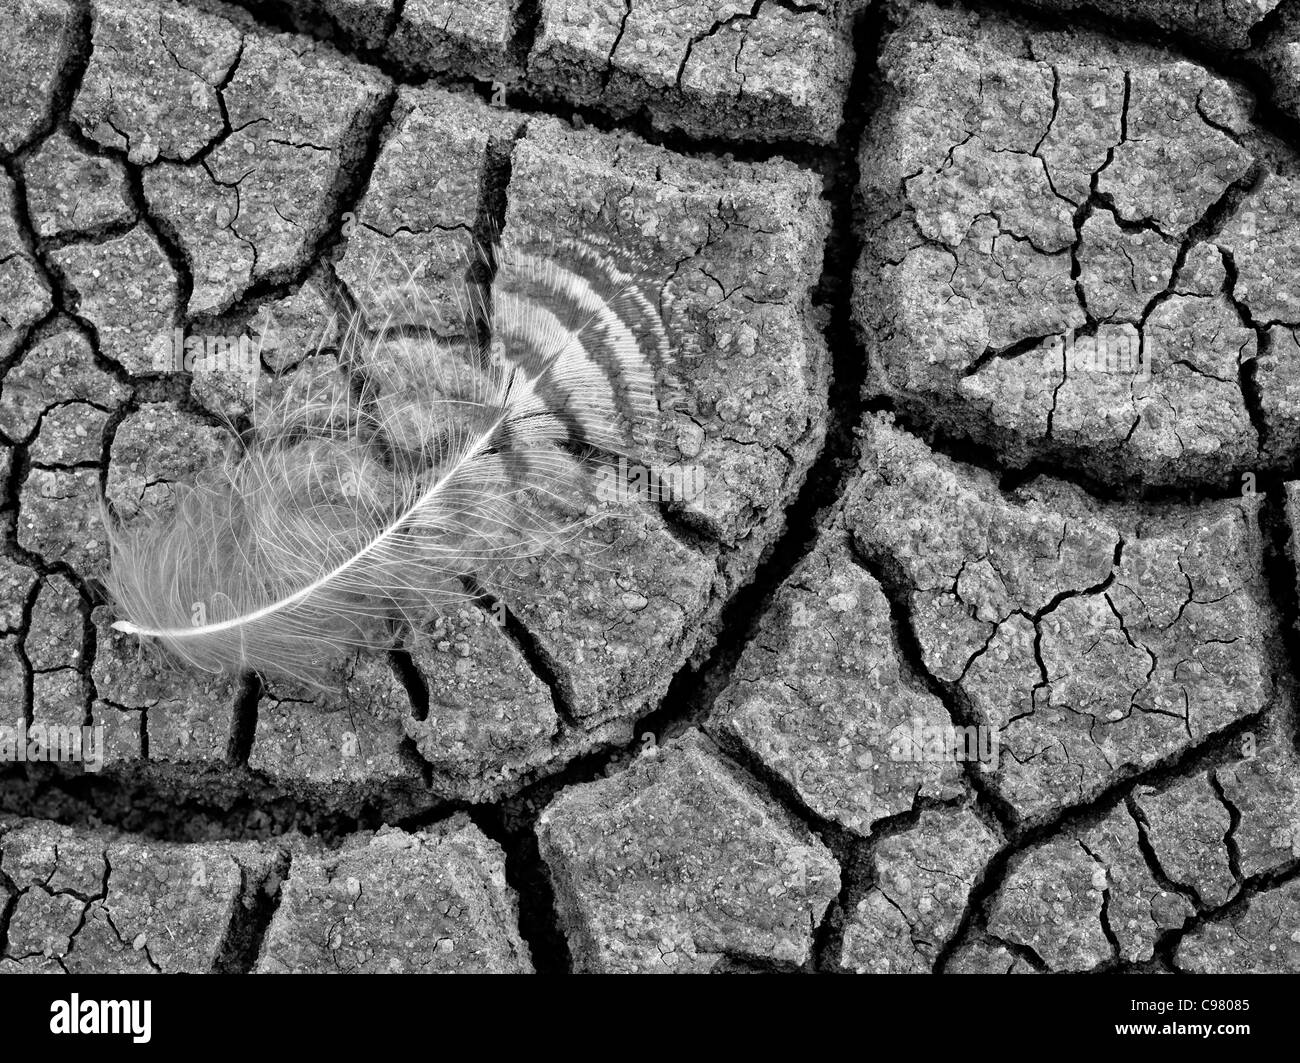 Close up of feather in cracked mud. John Day Fossil Beds National Monument. Oregon Stock Photo